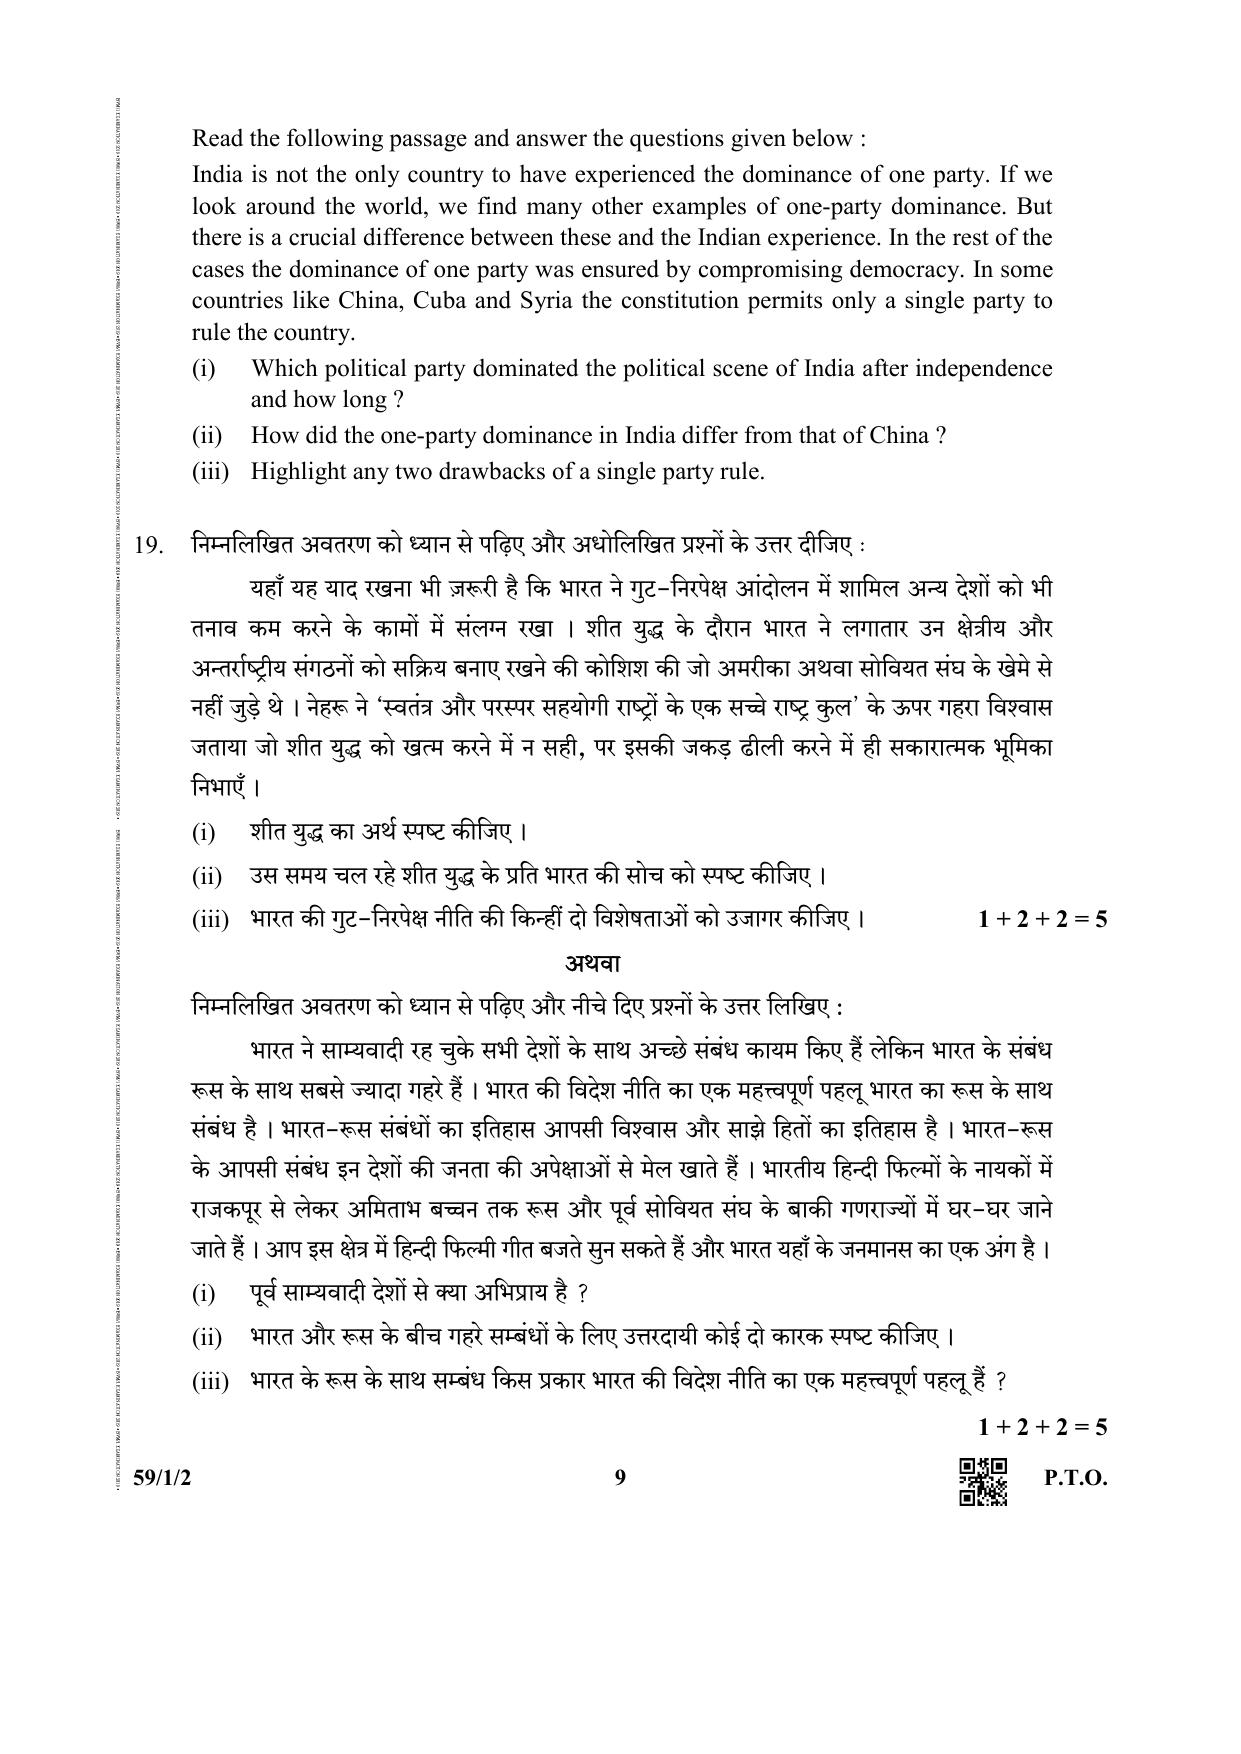 CBSE Class 12 59-1-2 (Political Science) 2019 Question Paper - Page 9